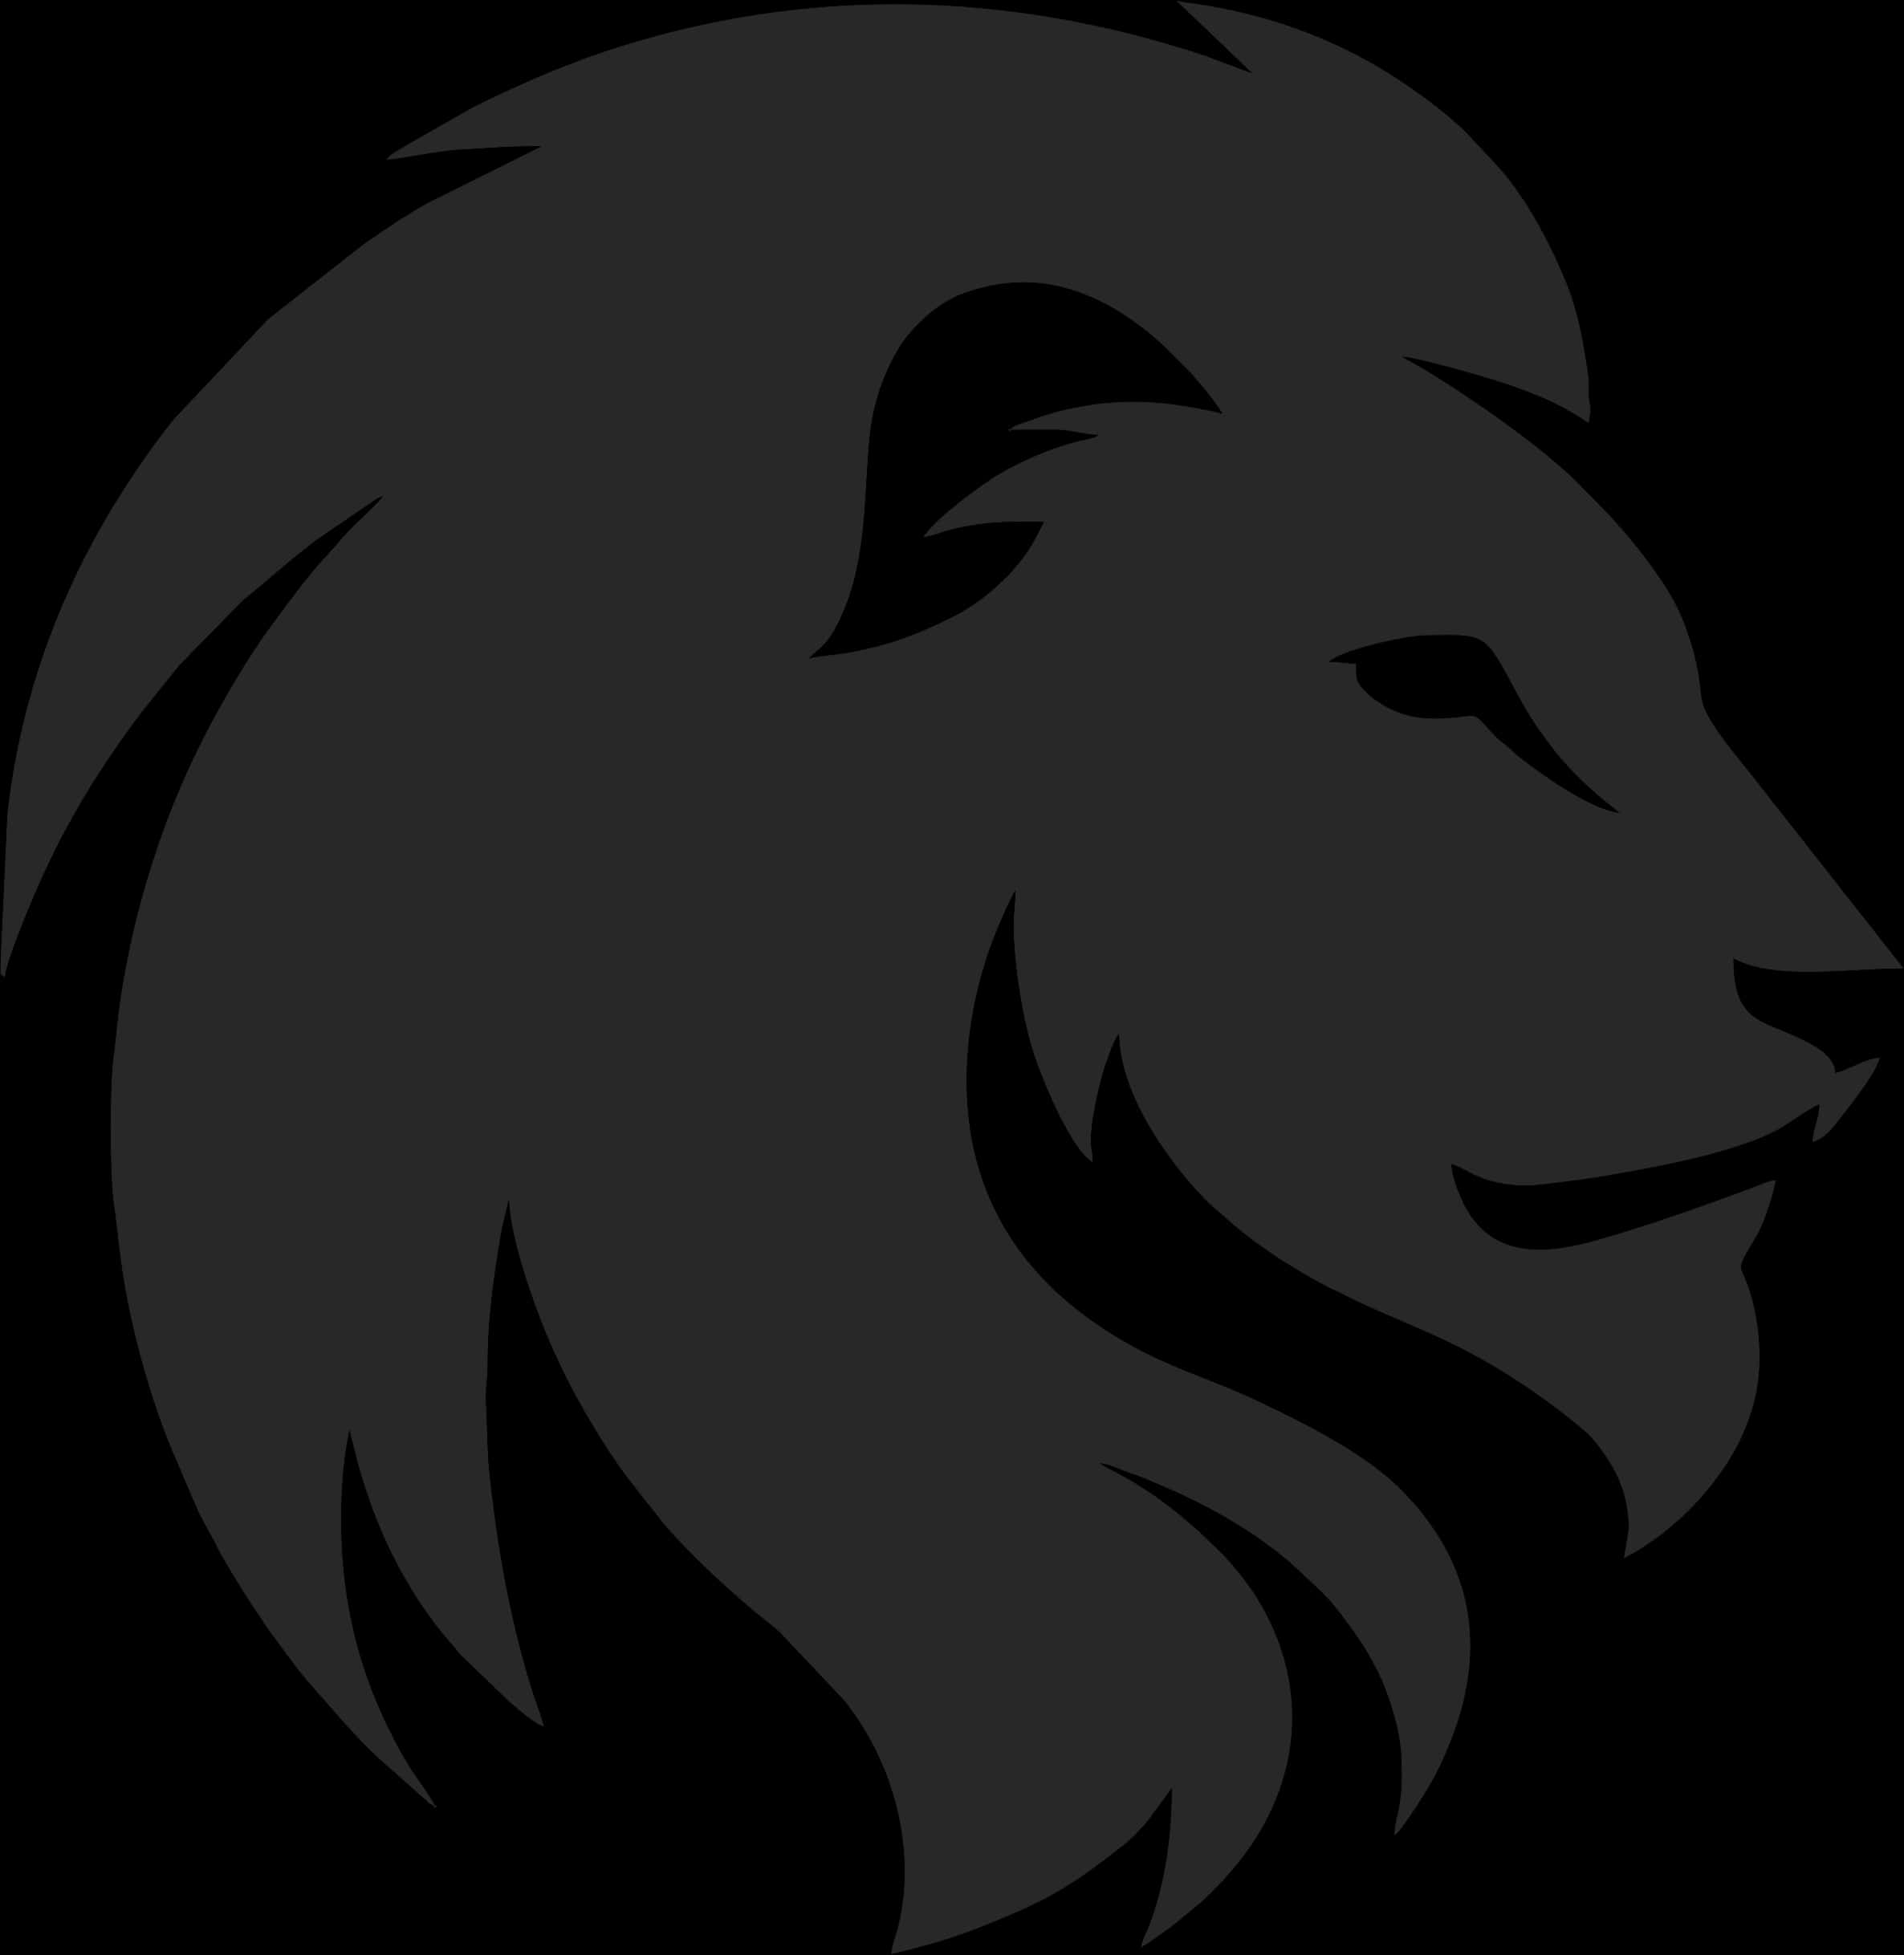 Stylized Lion Silhouette Graphic PNG image